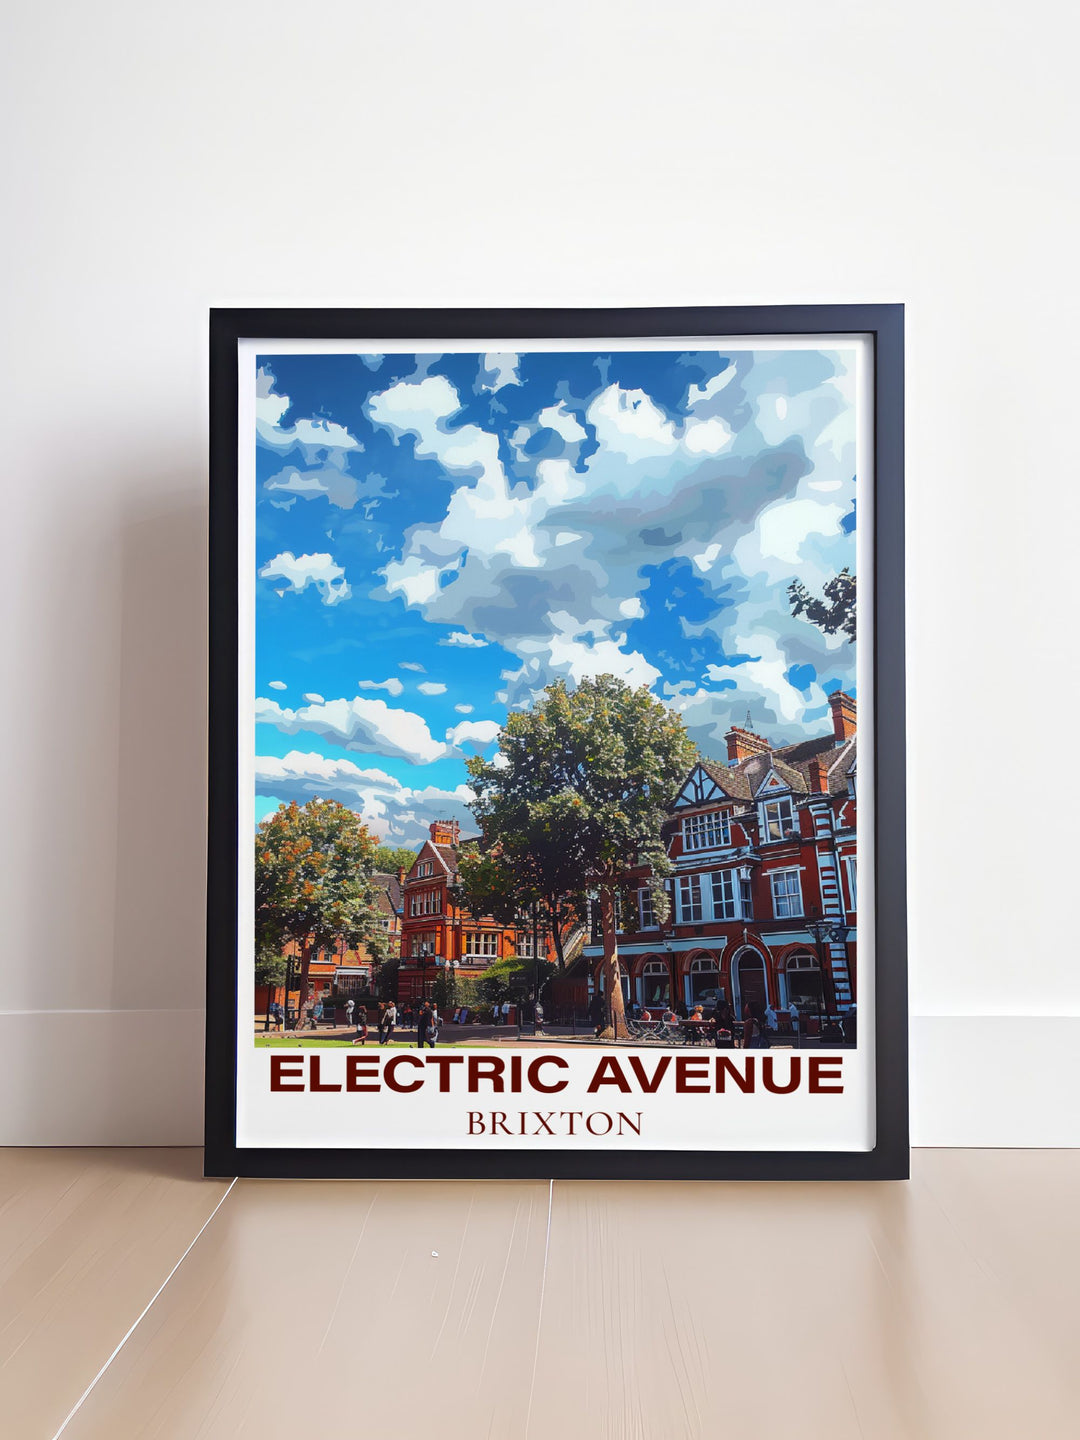 This art print of Electric Avenue and Windrush Square showcases the eclectic mix of market stalls, shops, and cultural landmarks, making it a standout piece for any decor.